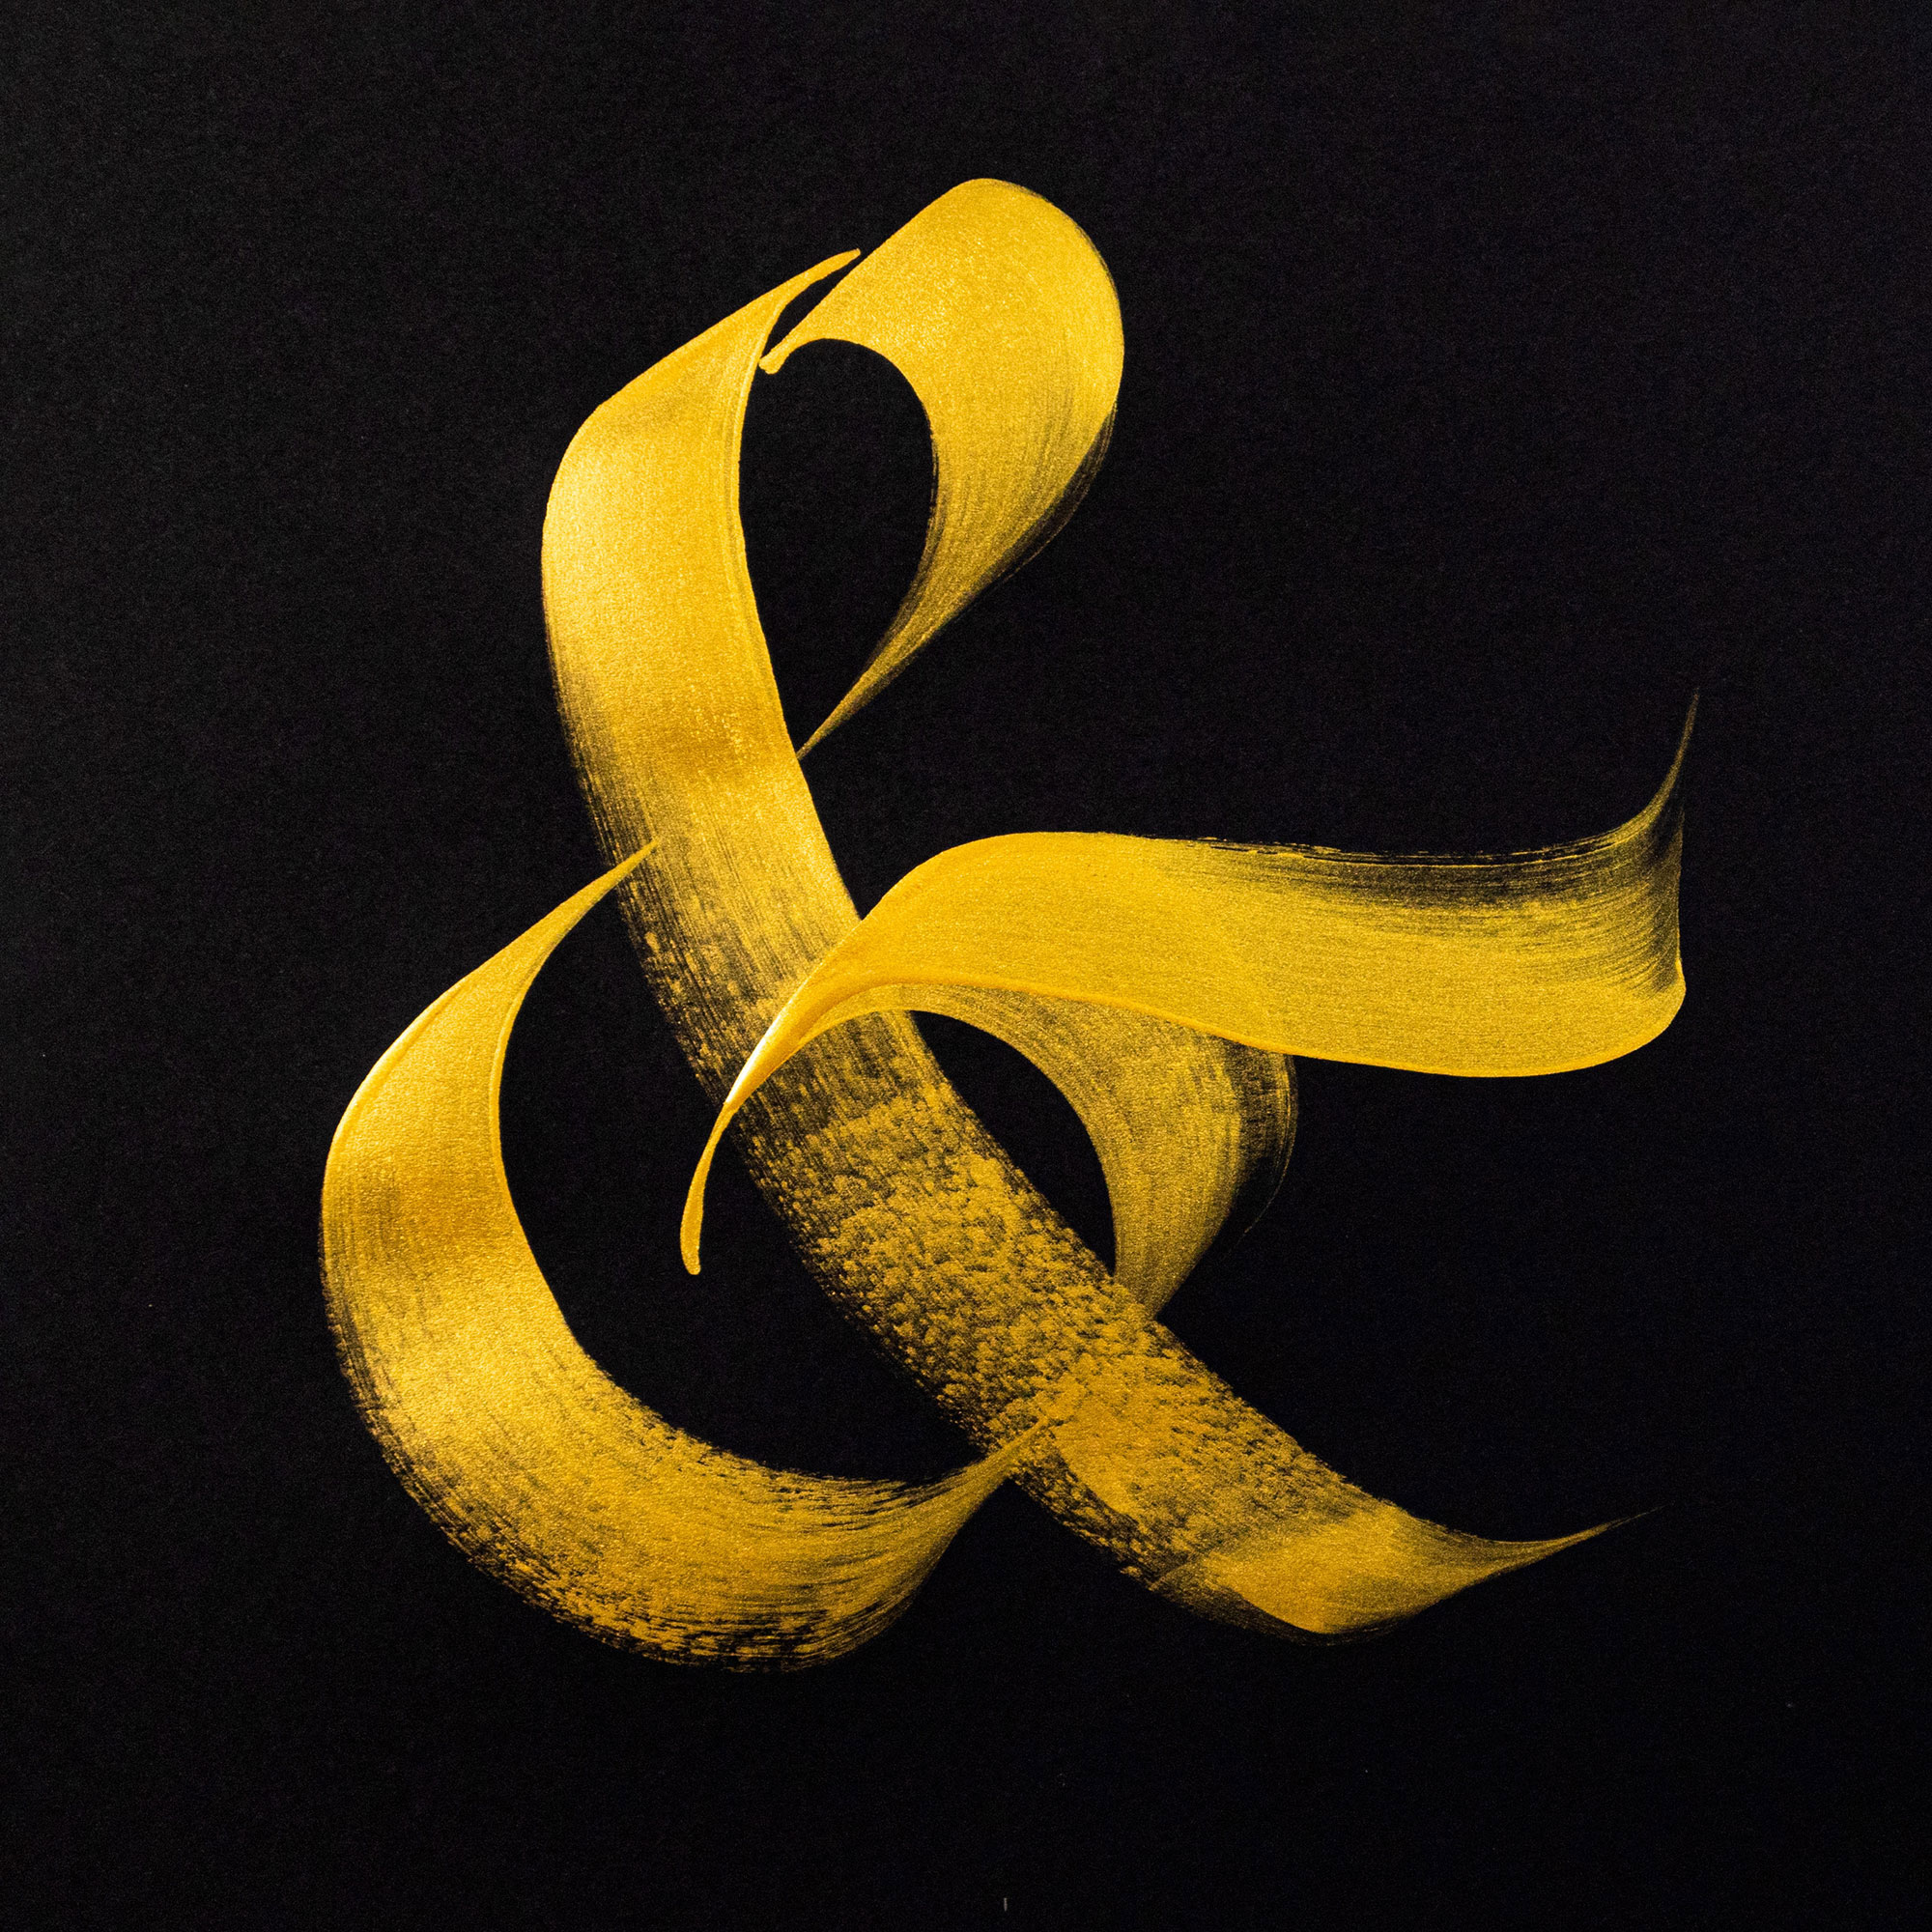 365/365 days practicing - The golden ampersand